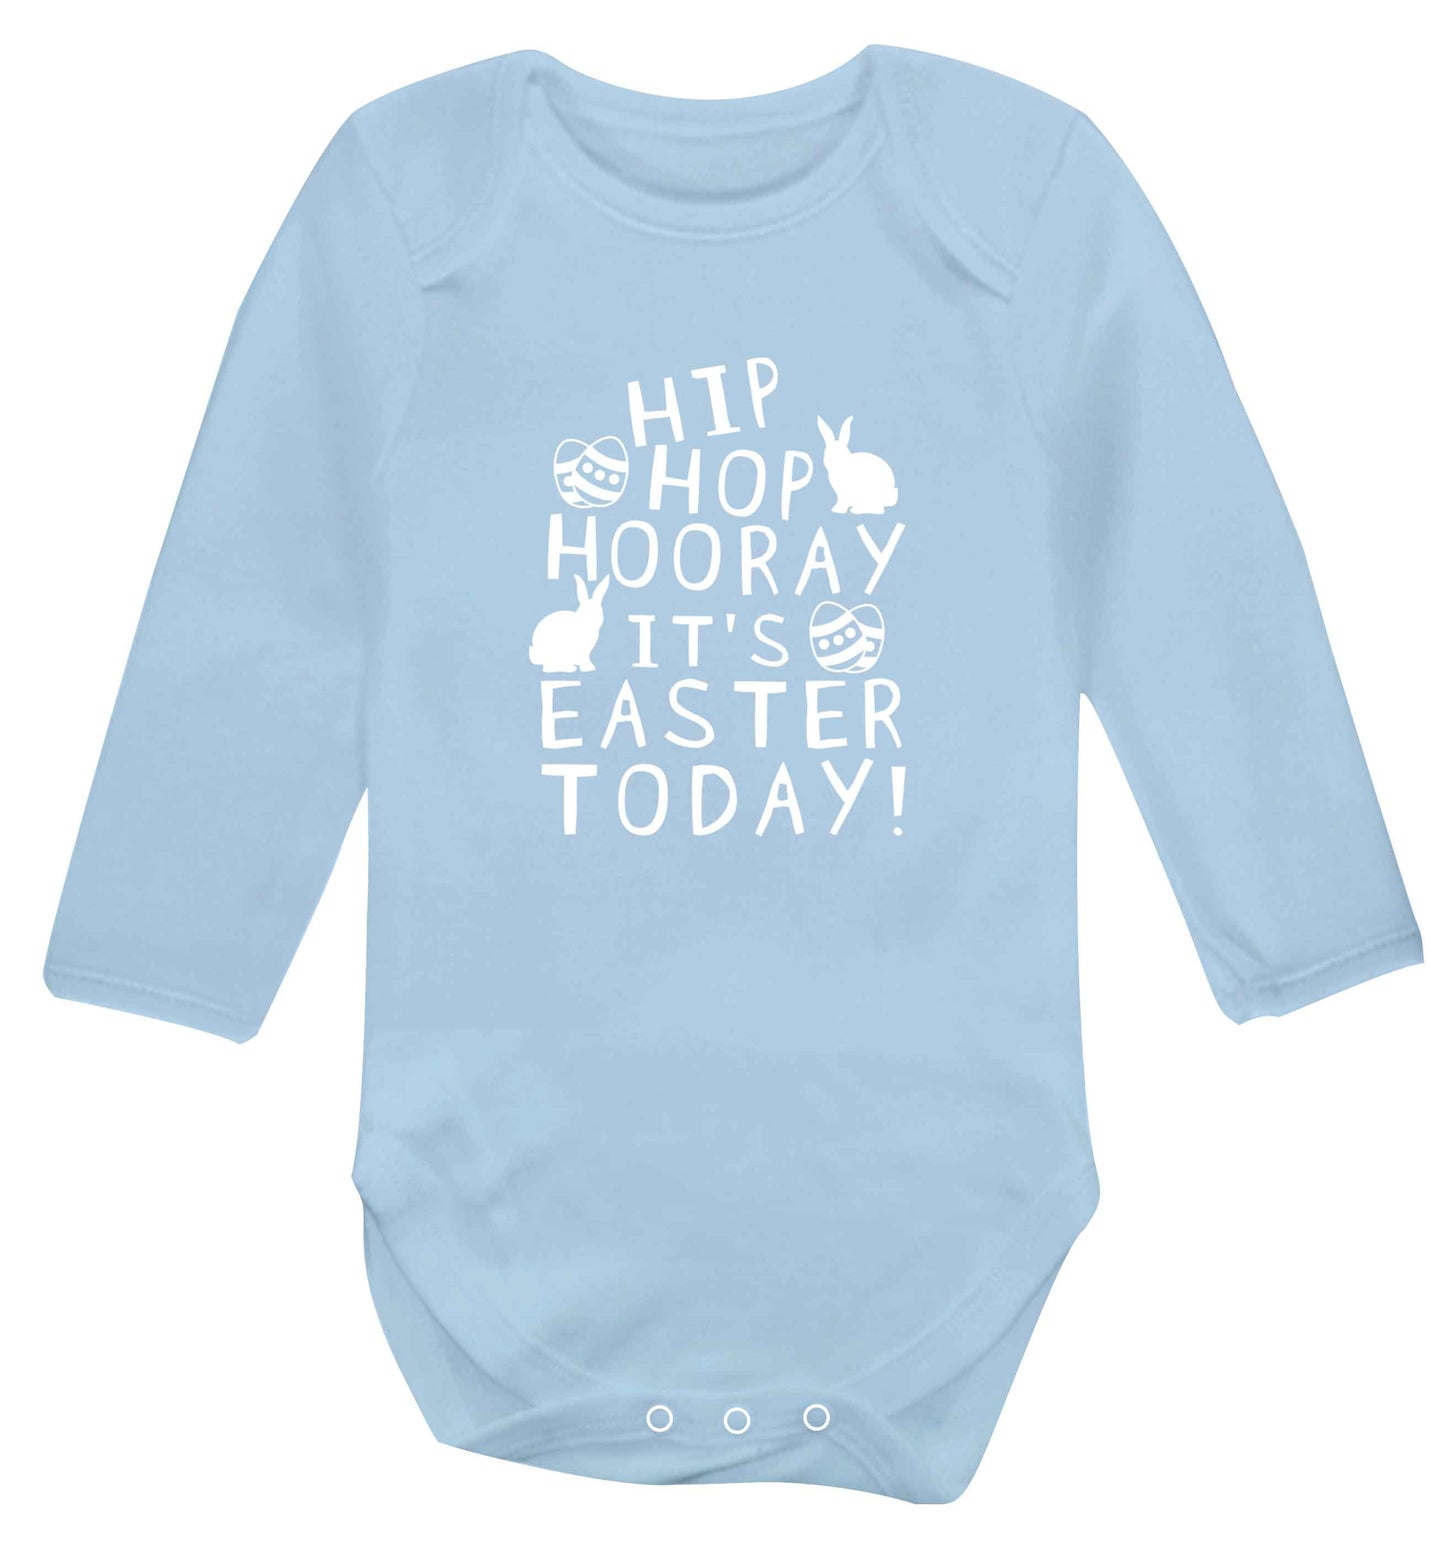 Hip hip hooray it's Easter today! baby vest long sleeved pale blue 6-12 months